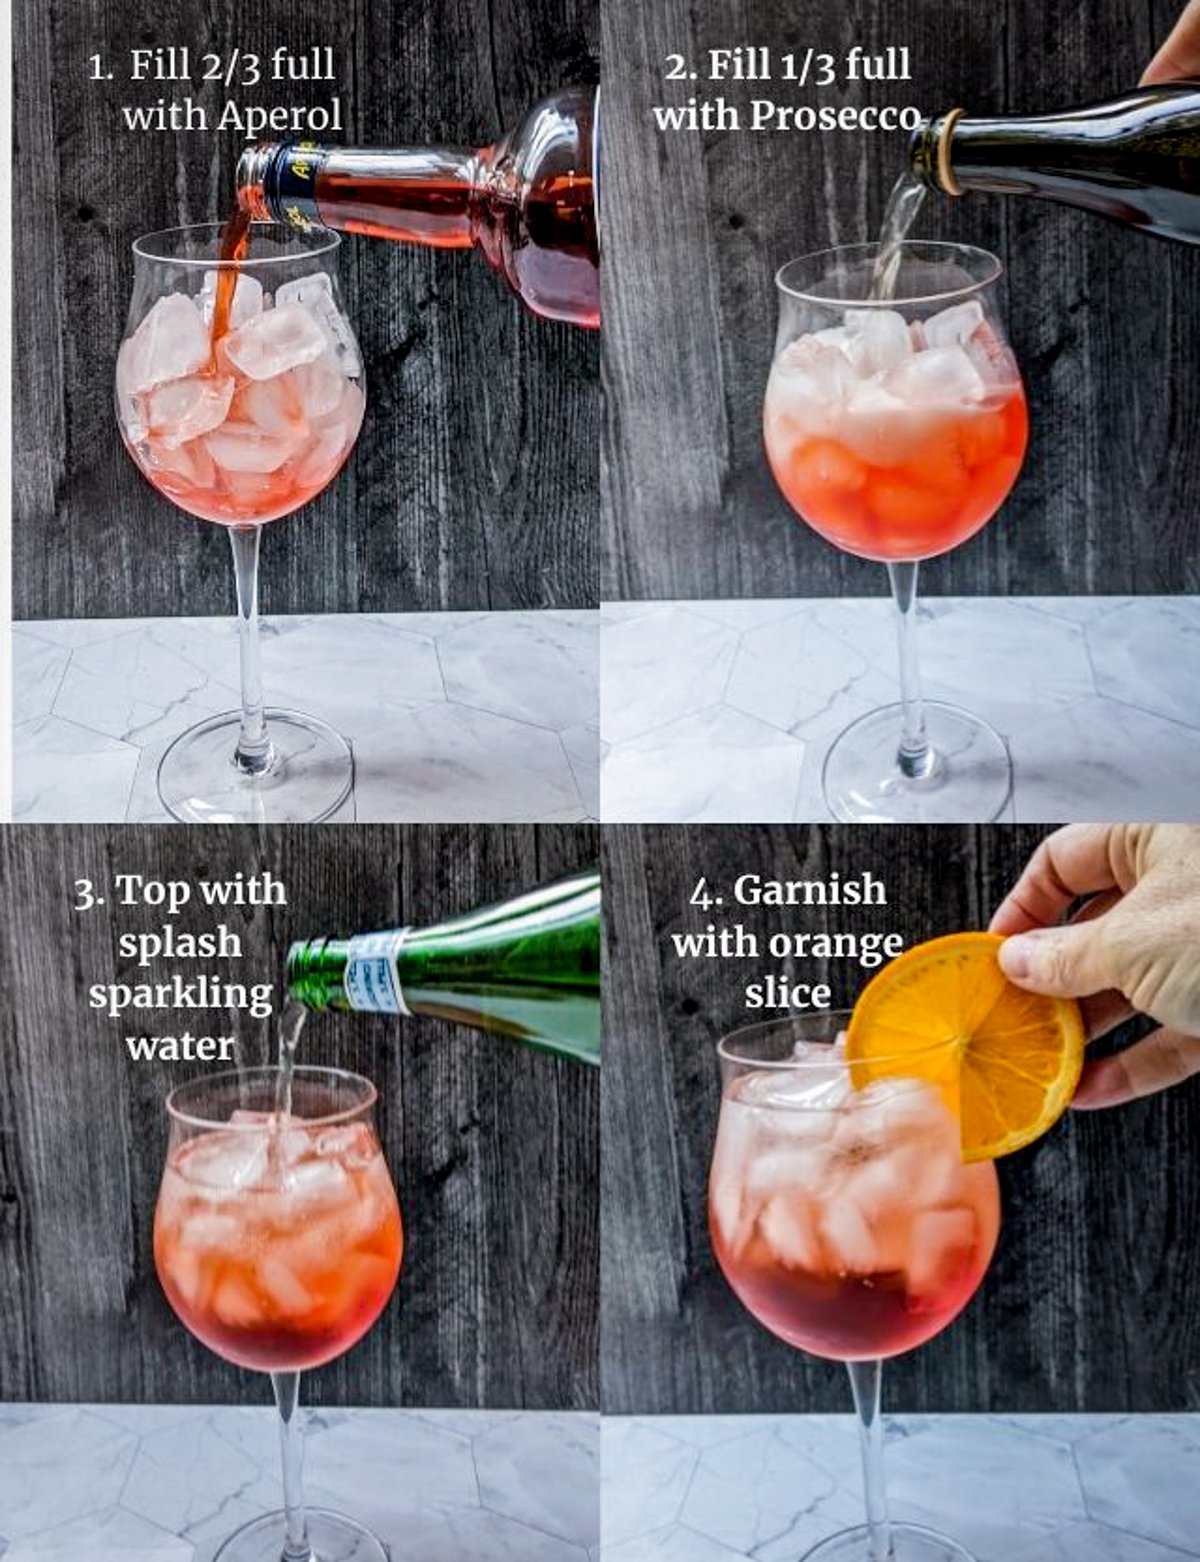 The four steps to making an Spritz Veneziano